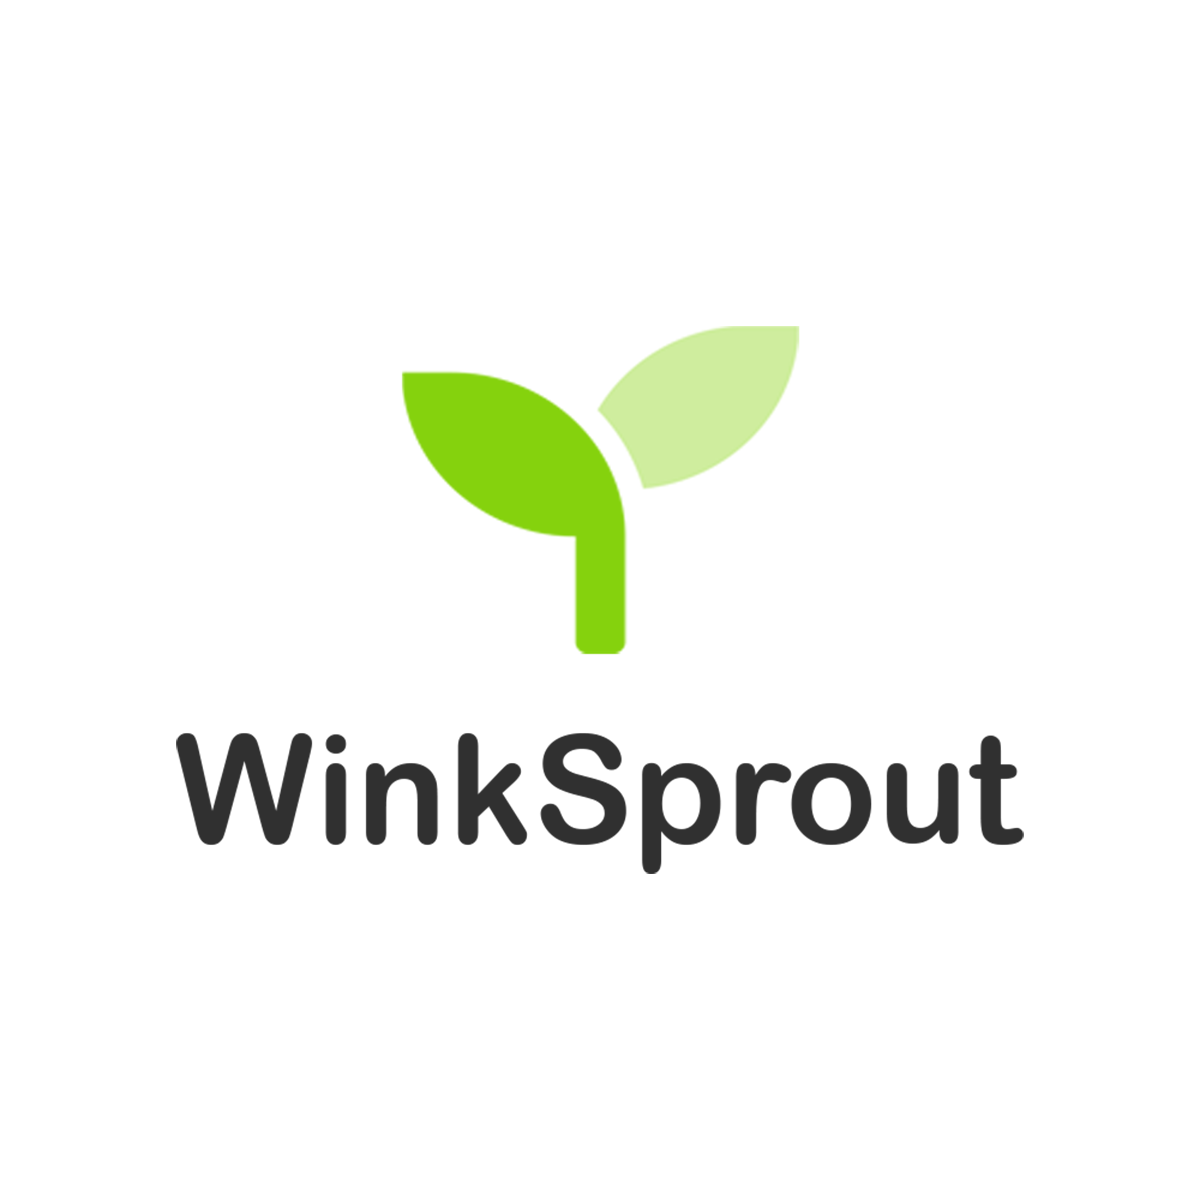 Hire Shopify Experts to integrate WinkSprout app into a Shopify store